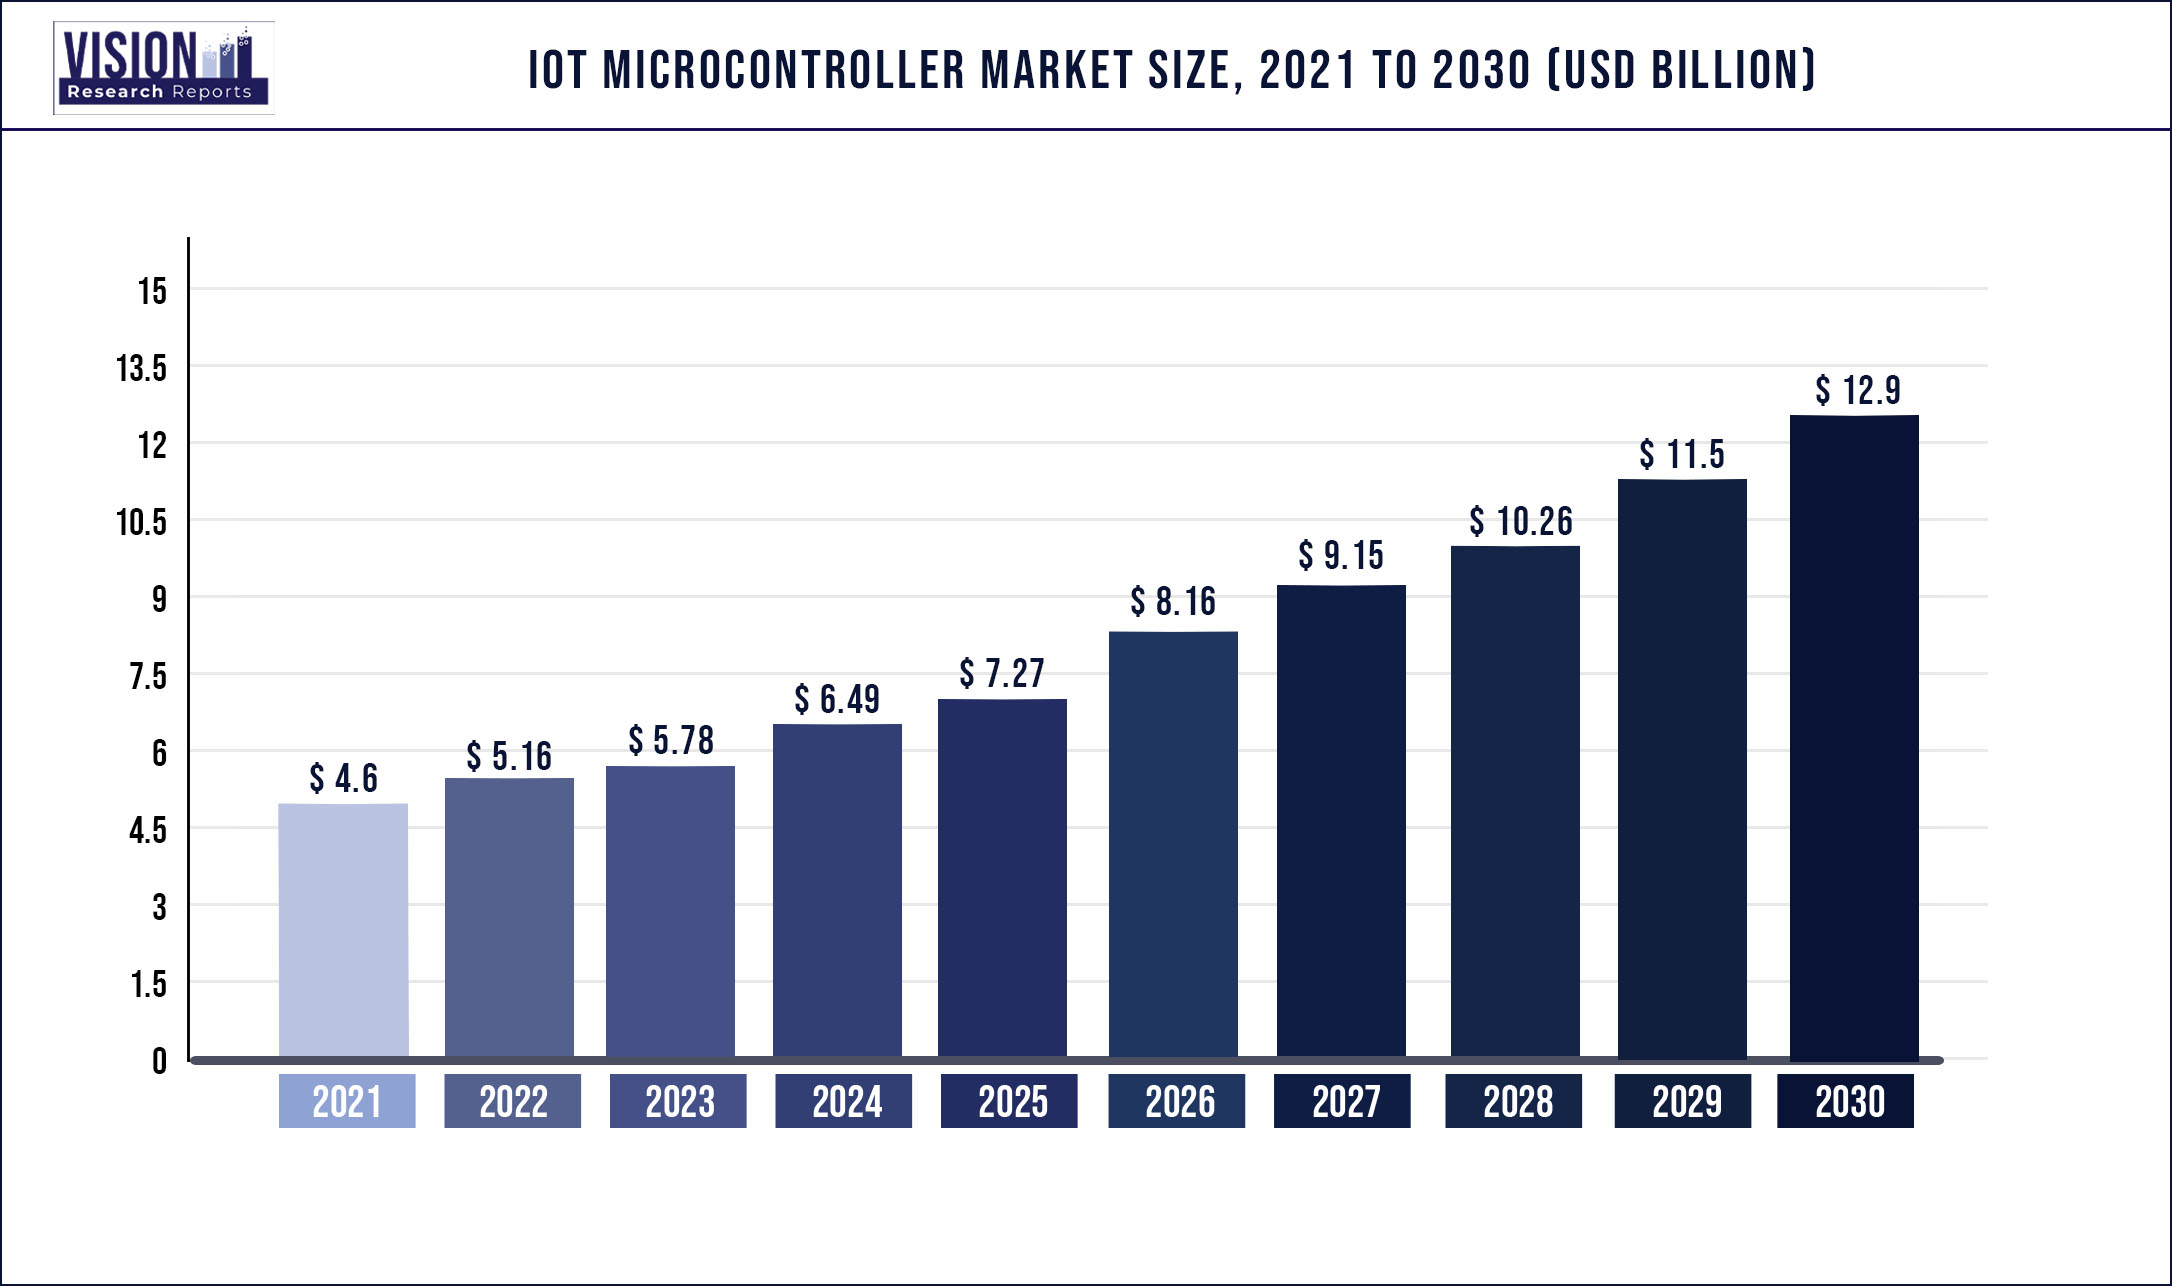 IoT Microcontroller Market Size 2021 to 2030